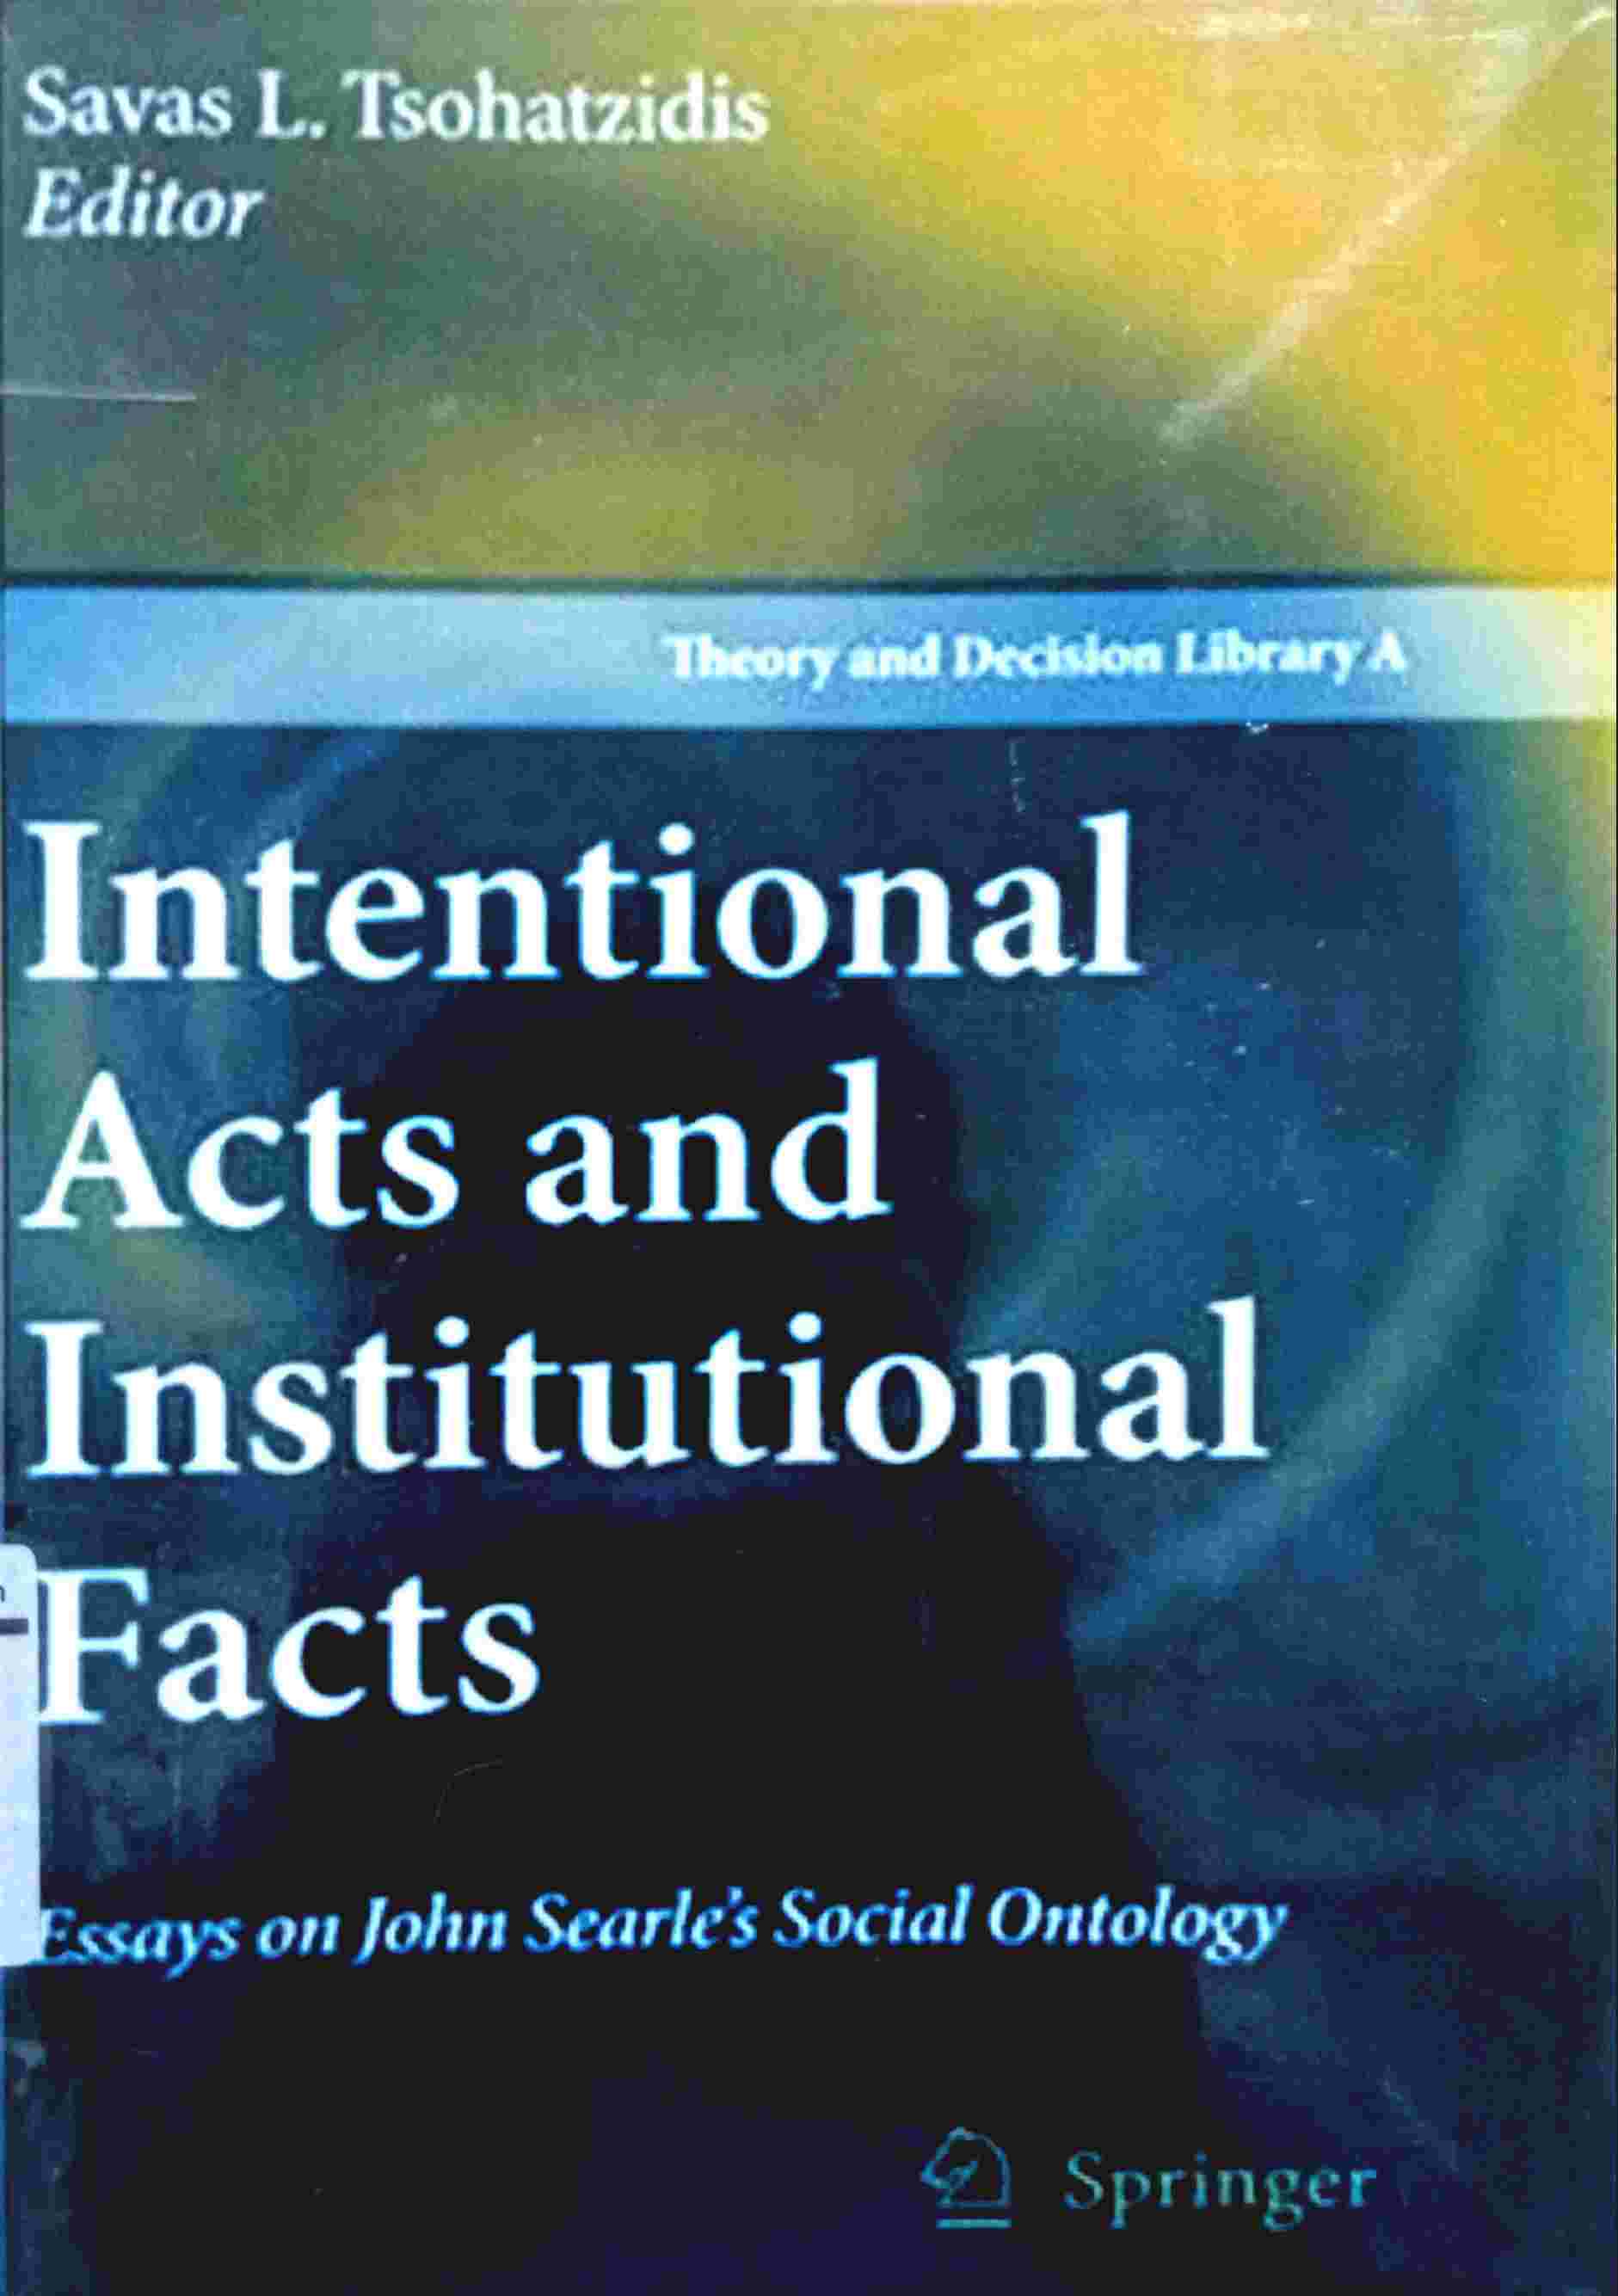 INTENTIONAL ACTS AND INSTITUTIONAL FACTS